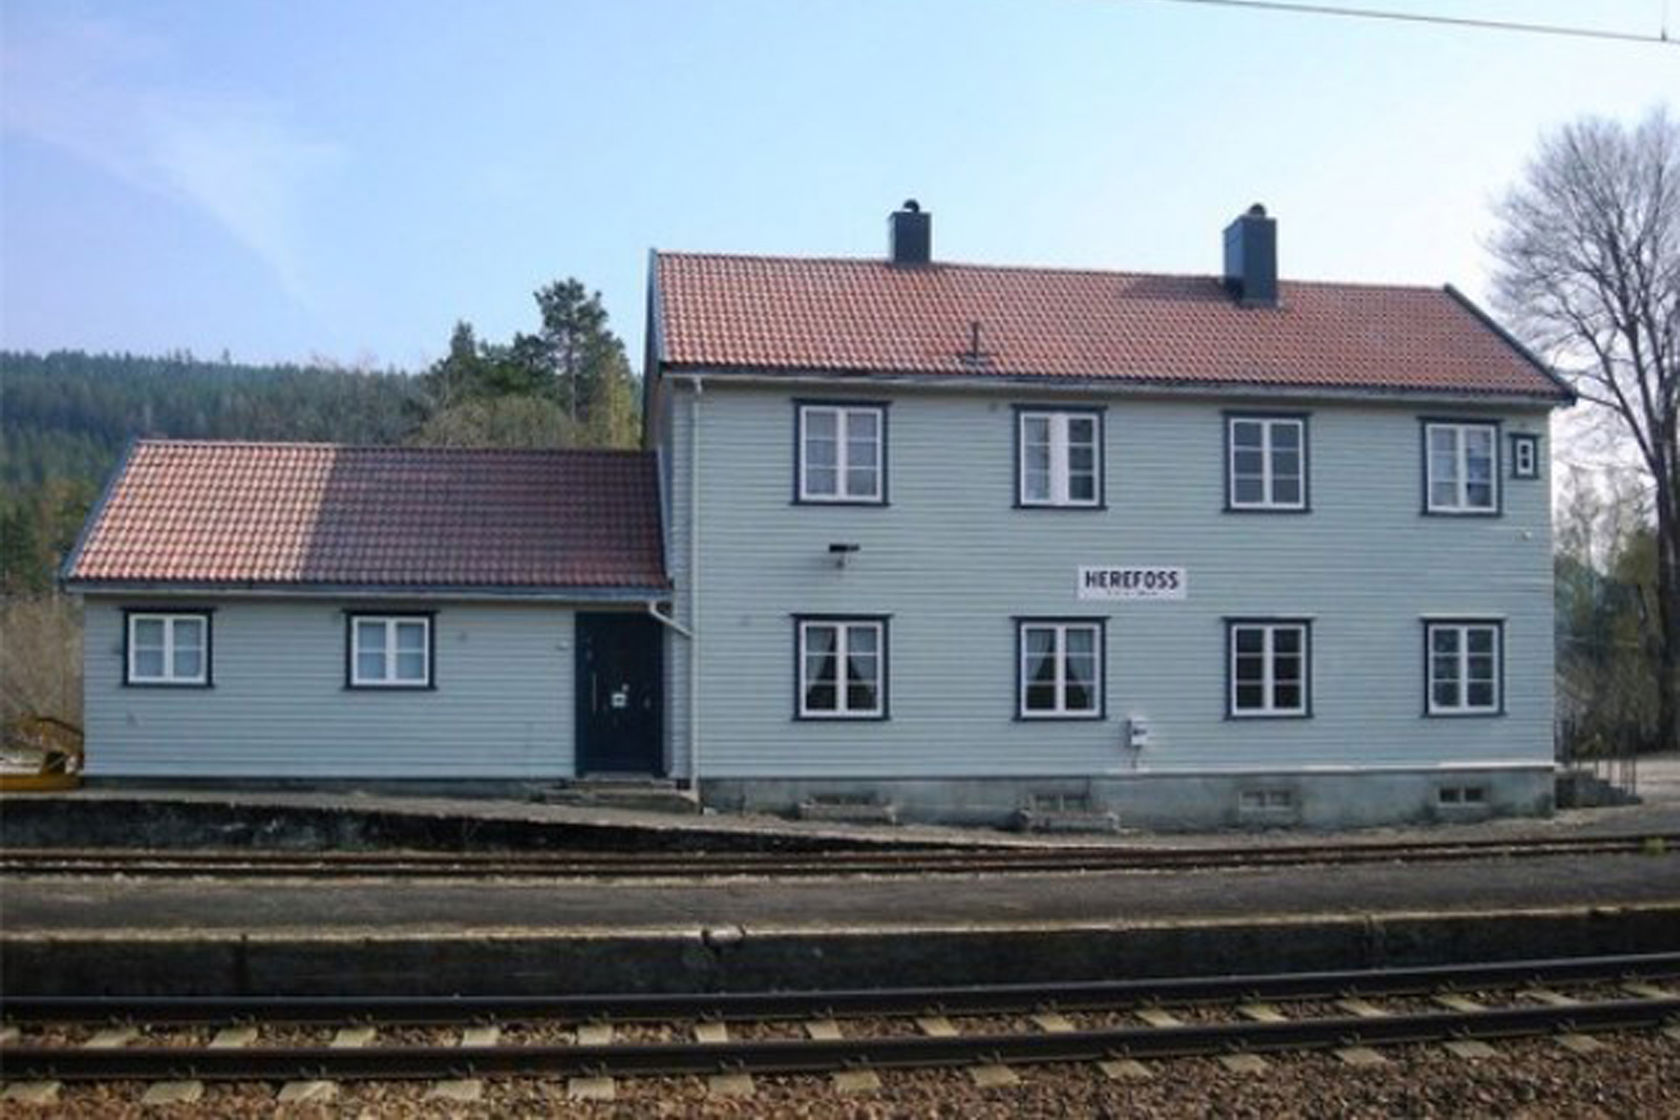 Tracks and station building at Herefoss station